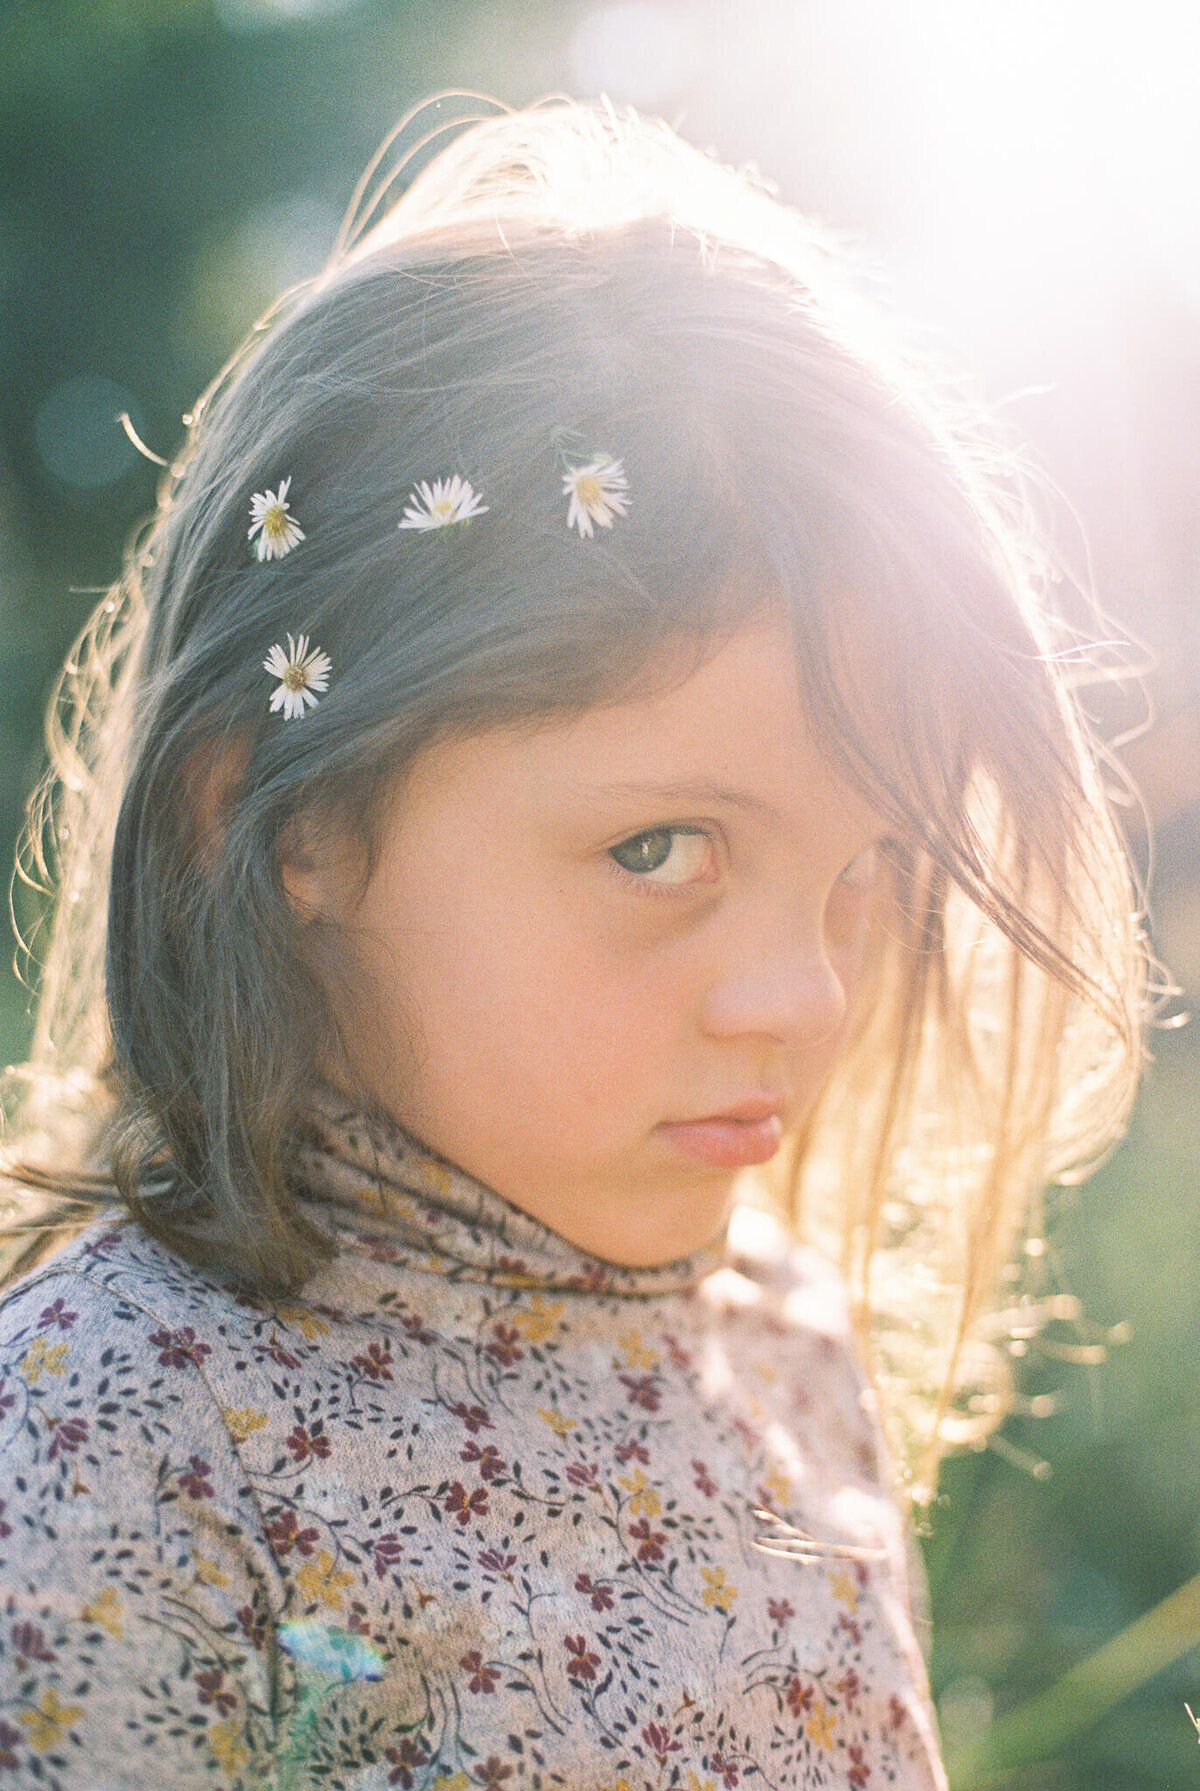 child on film in golden light with flowers in hair